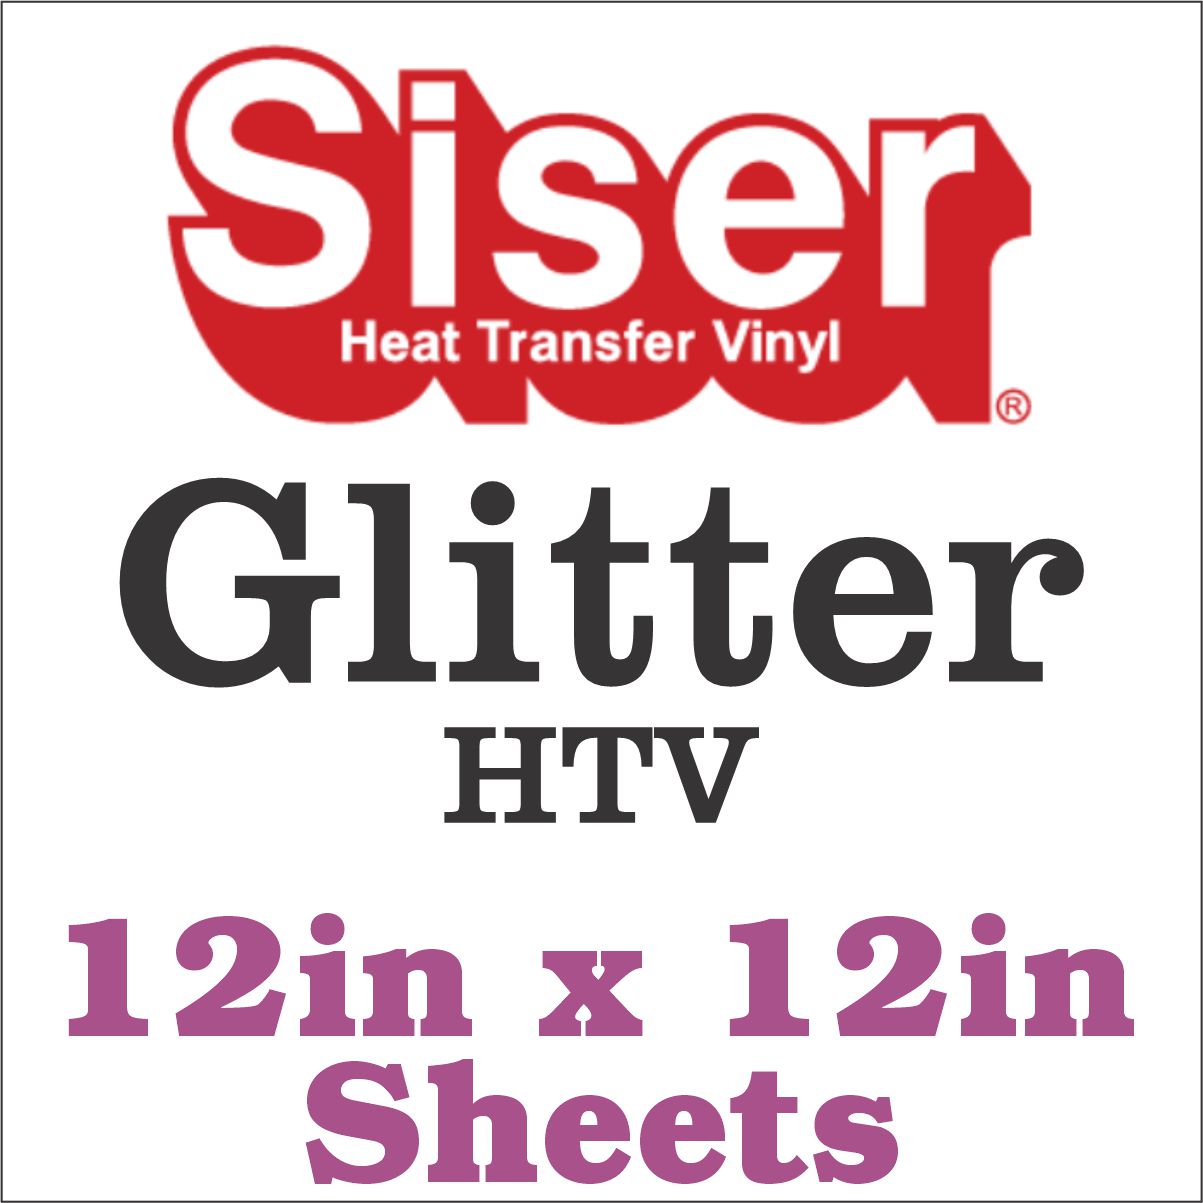 Siser Glitter HTV 12in x 12in Sheets SALE While Supplies Last